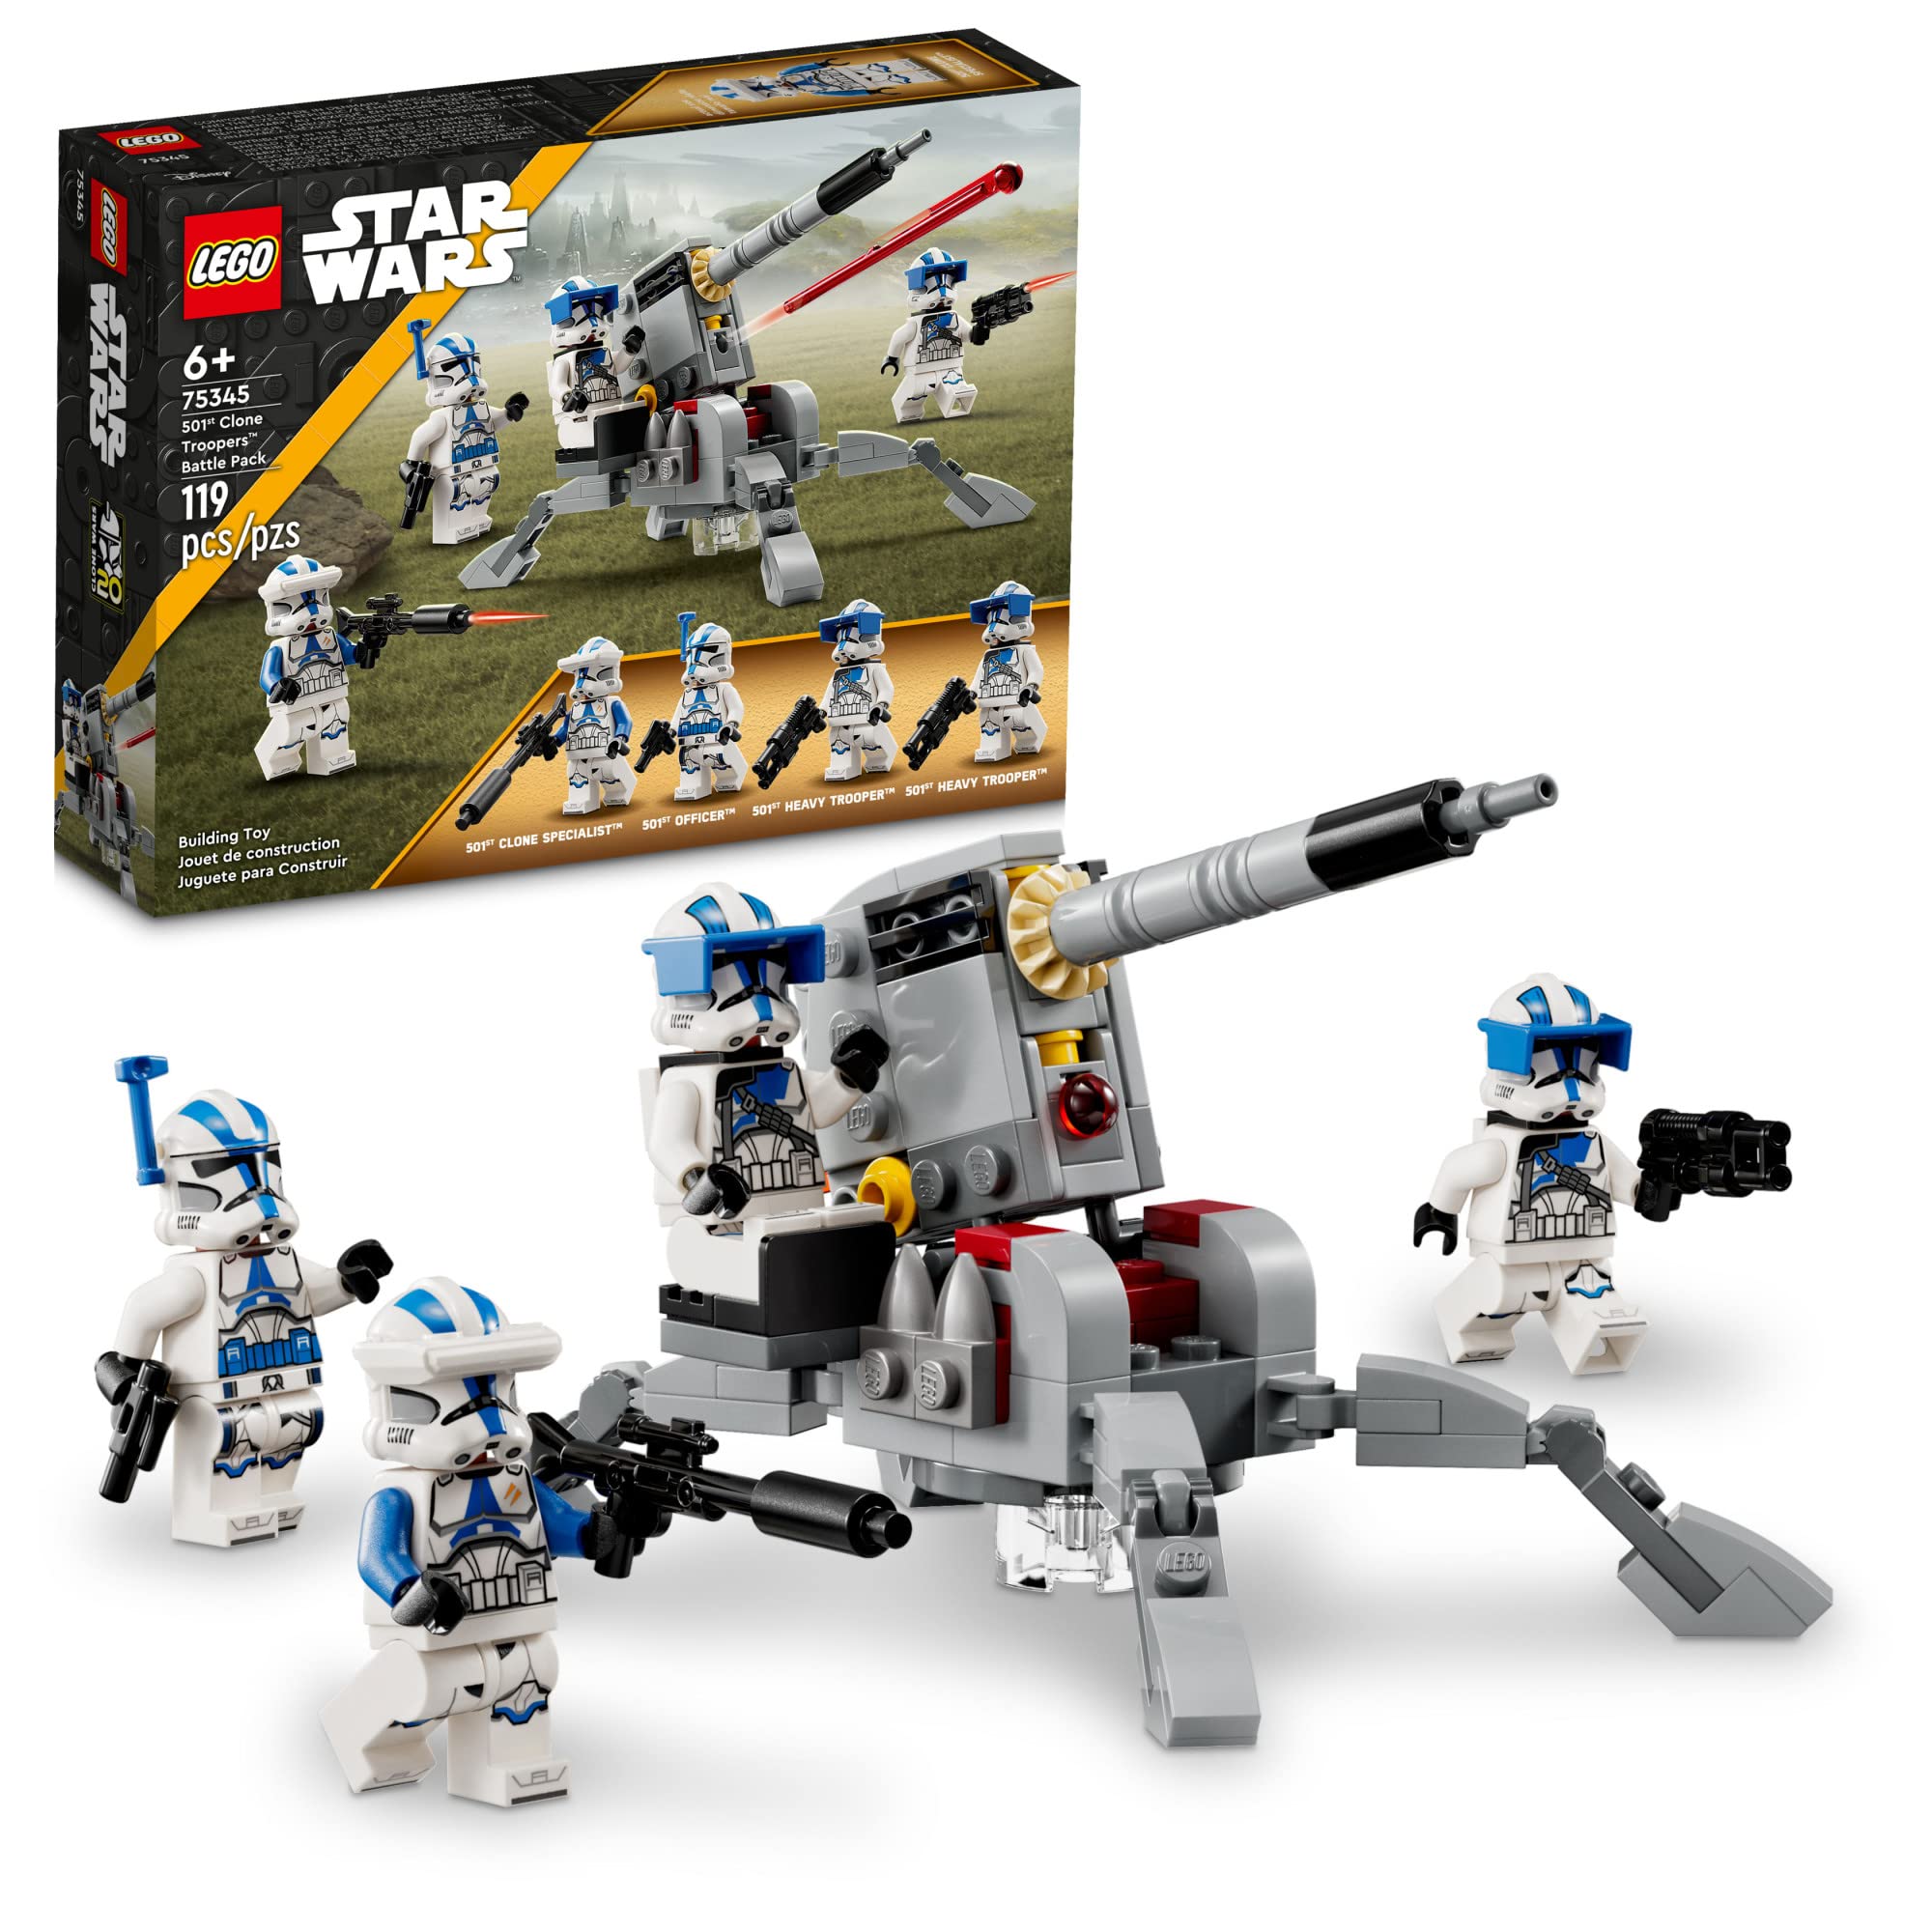 LEGO Star Wars 501st Clone Troopers Battle Pack Toy Set, Buildable AV-7 Anti Vehicle Cannon, with 4 Clone Trooper Minifigures, Portable Travel Toy, $15.99